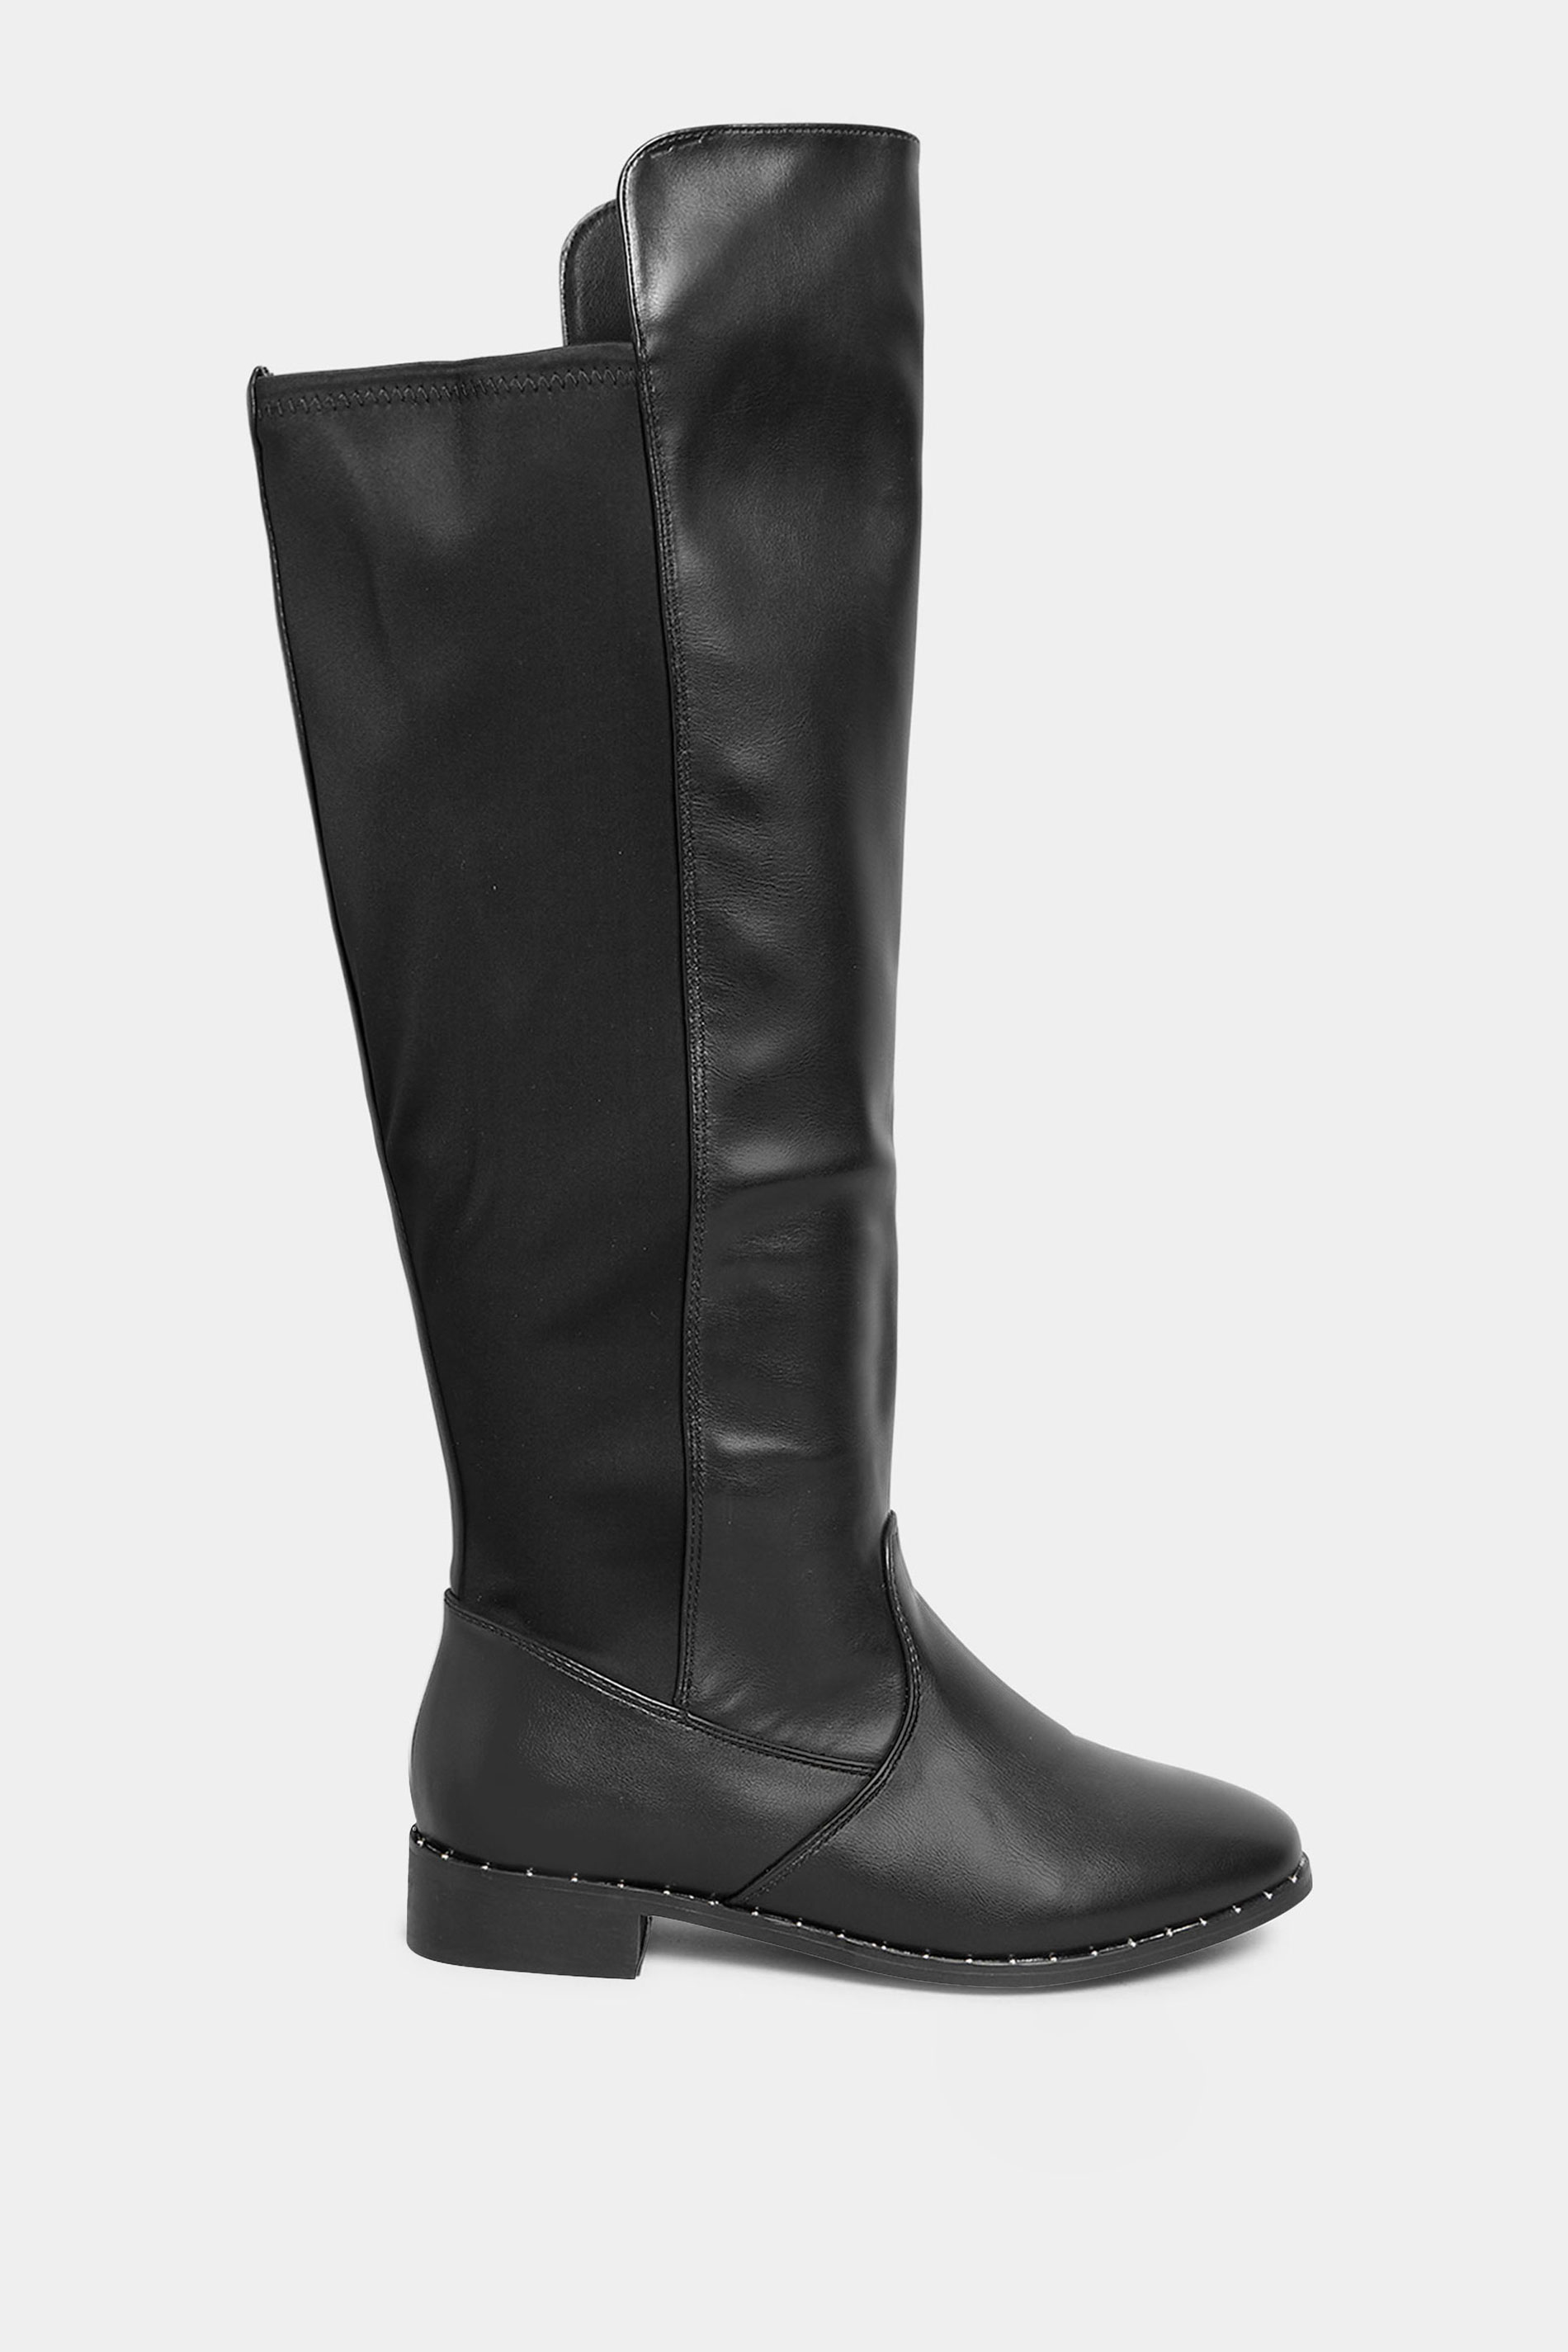 Black Studded Knee High Boots In Wide E Fit & Extra Wide EEE Fit | Yours Clothing 3